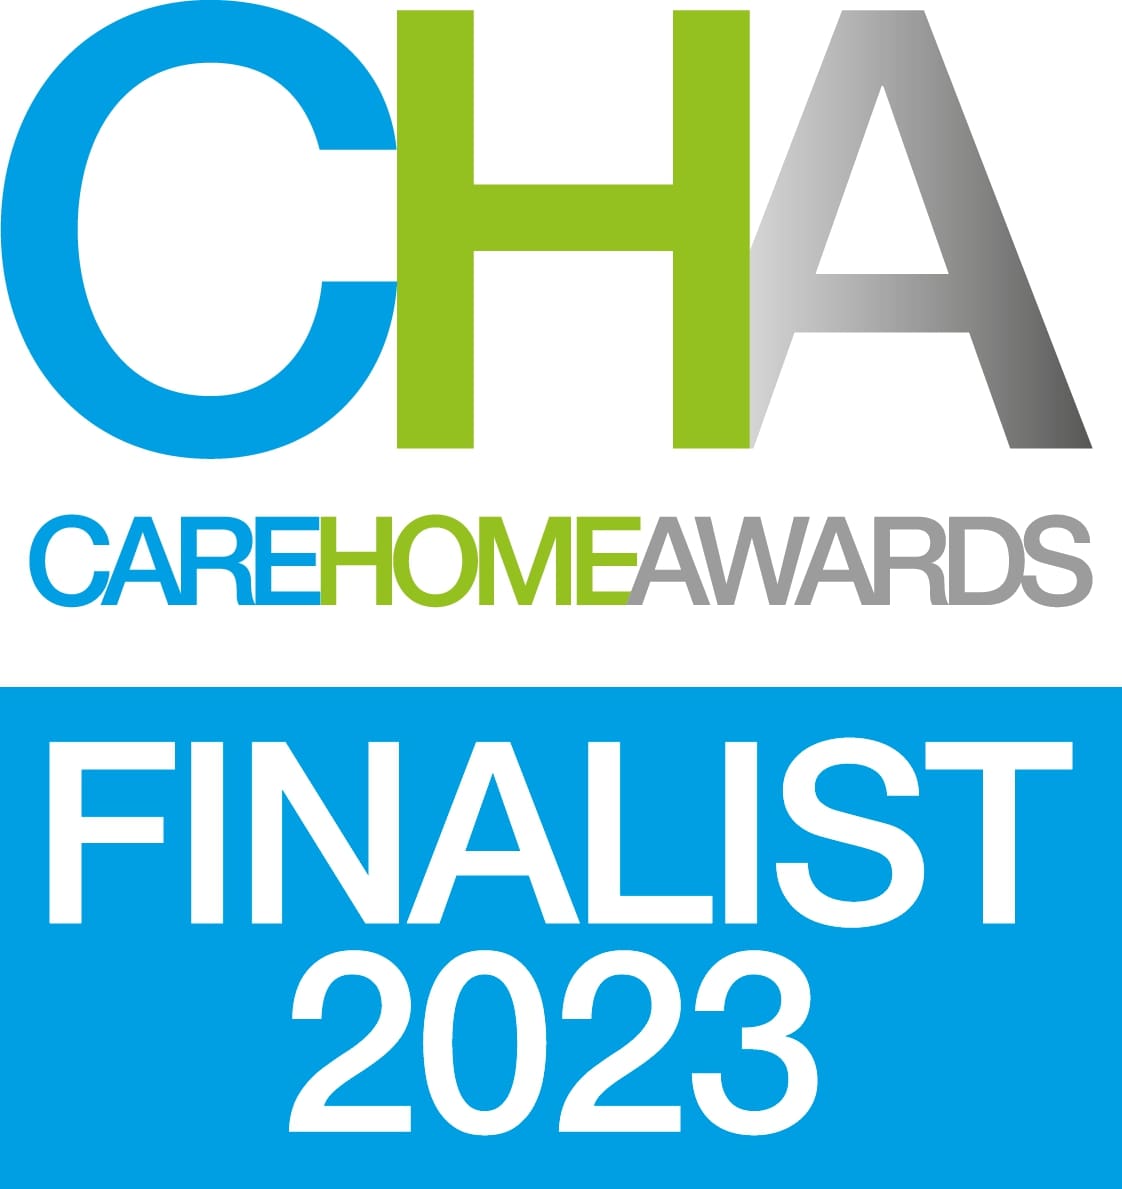 Care Home Awards 2023 Finalist - Best Care Home Marketing, Advertising or PR Activities